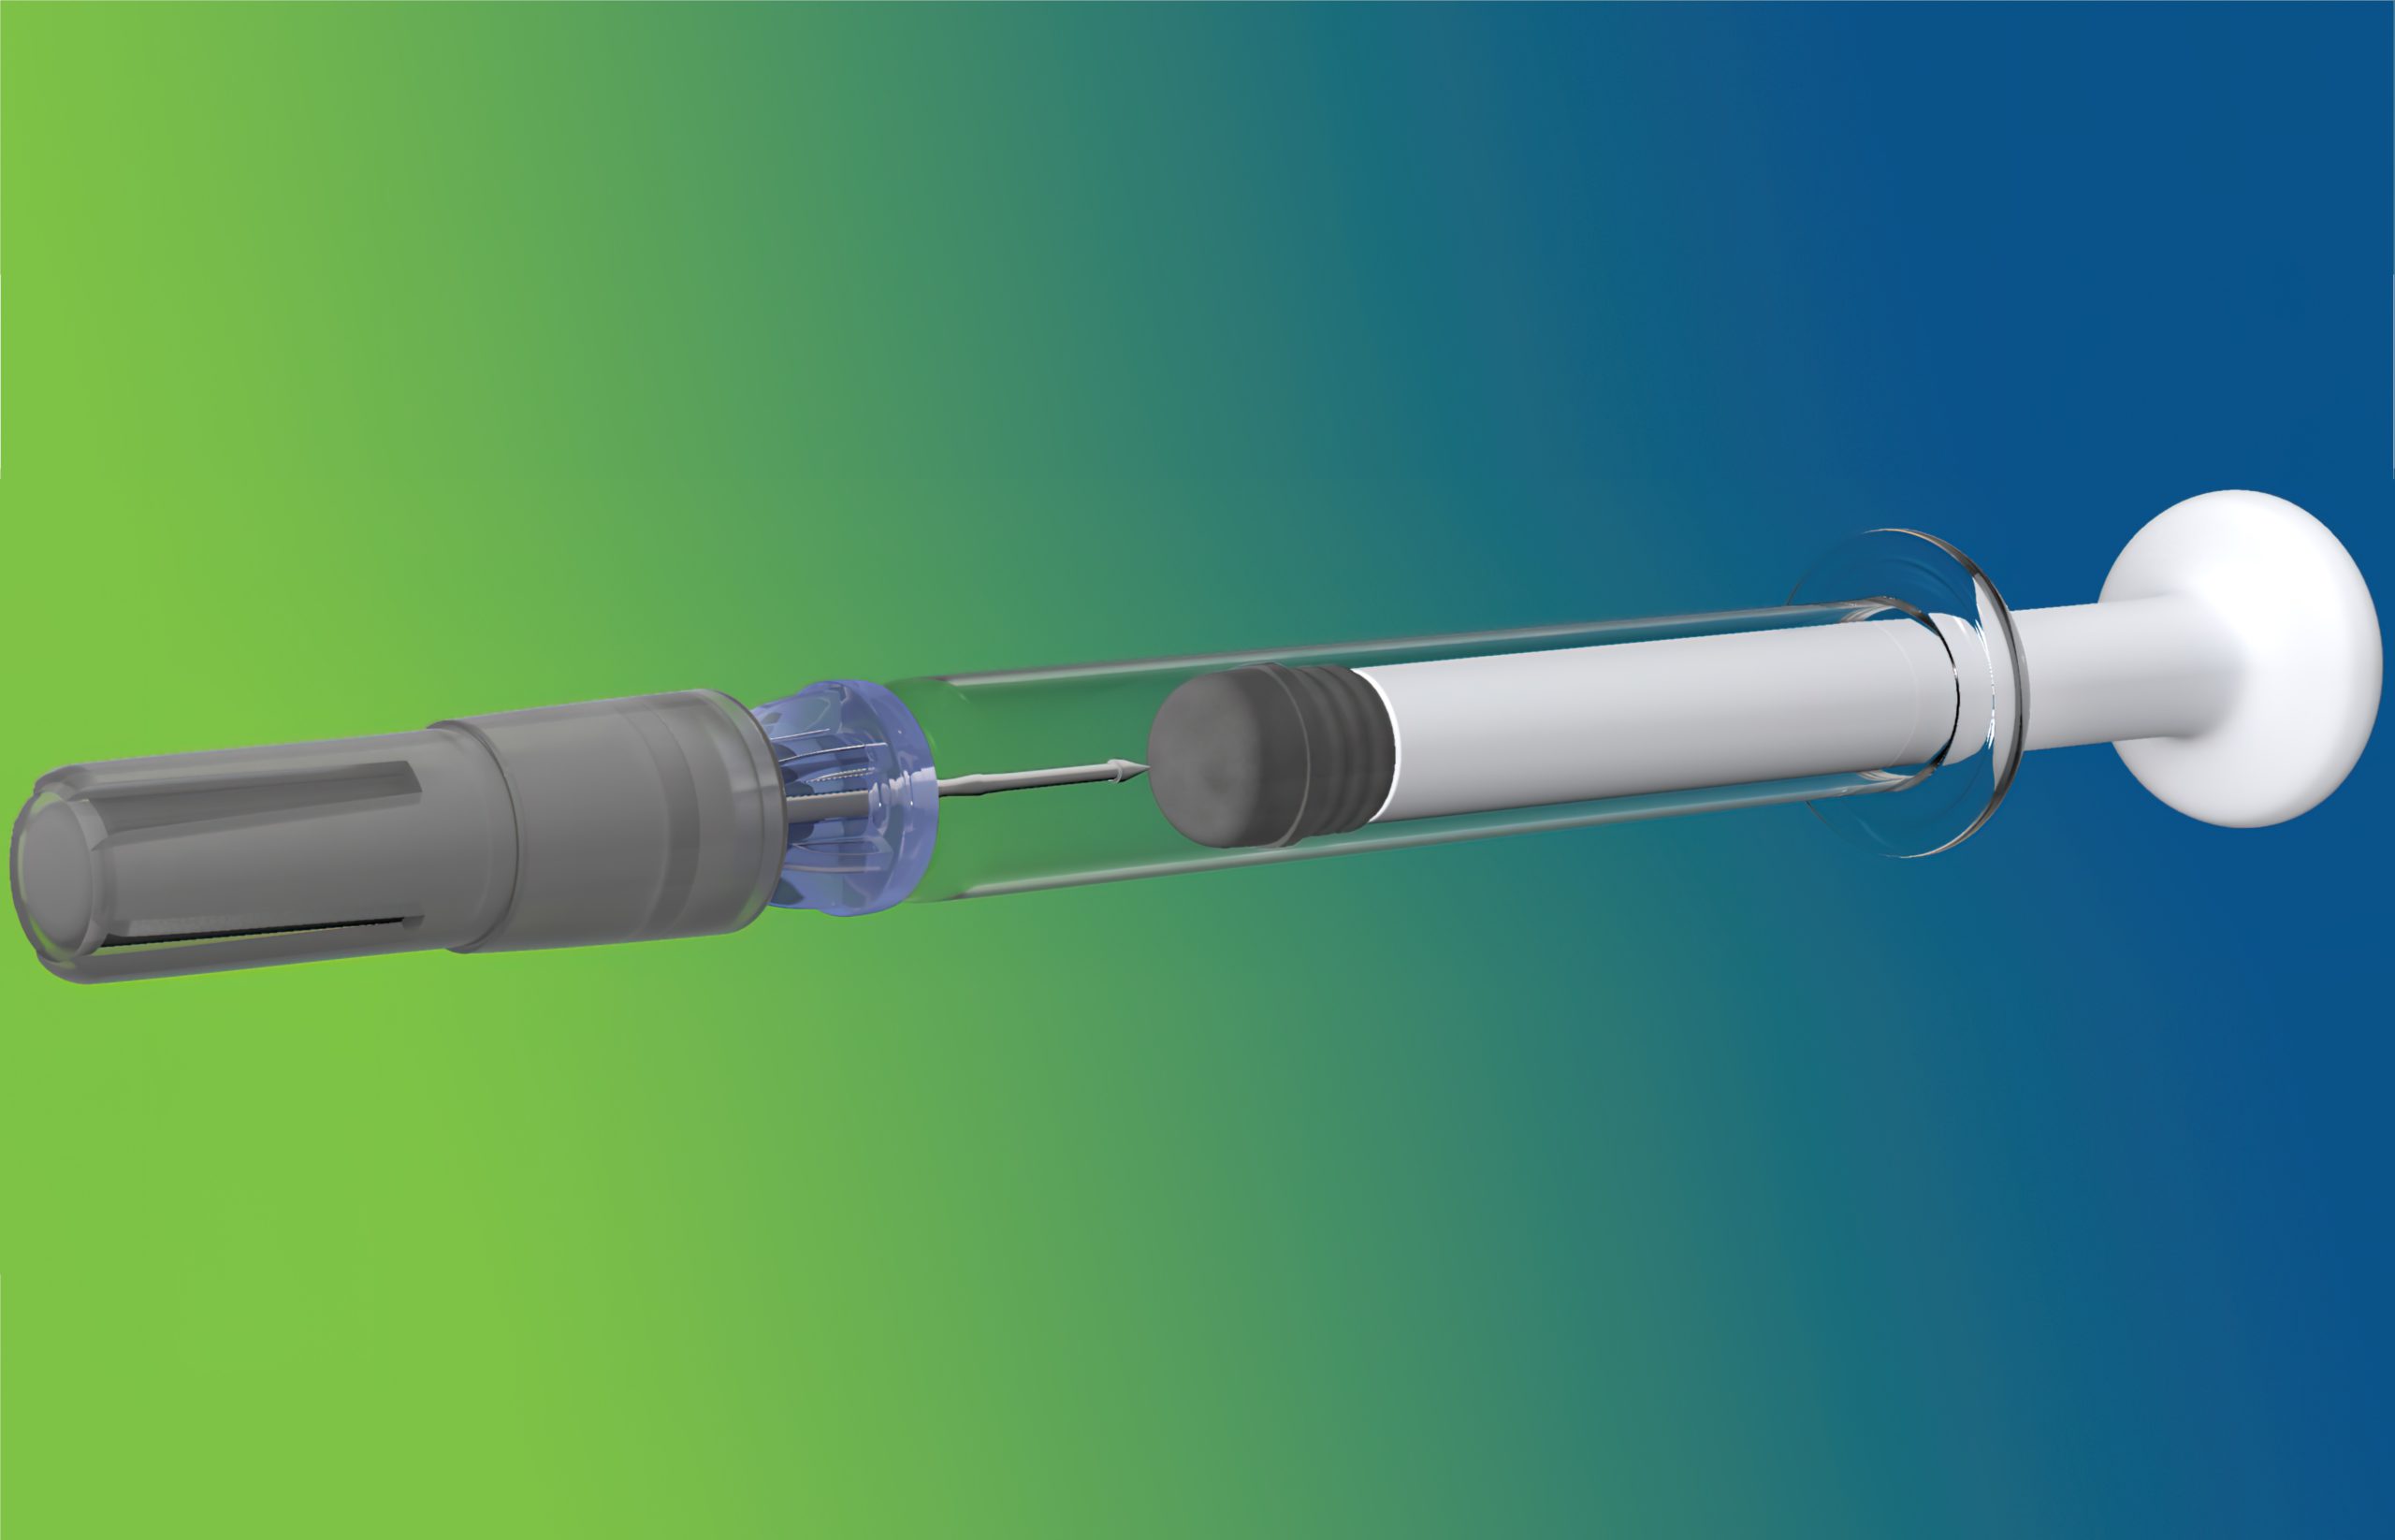 TAKING INTEGRATED NEEDLE SAFETY SYSTEMS FOR PREFILLED SYRINGES TO